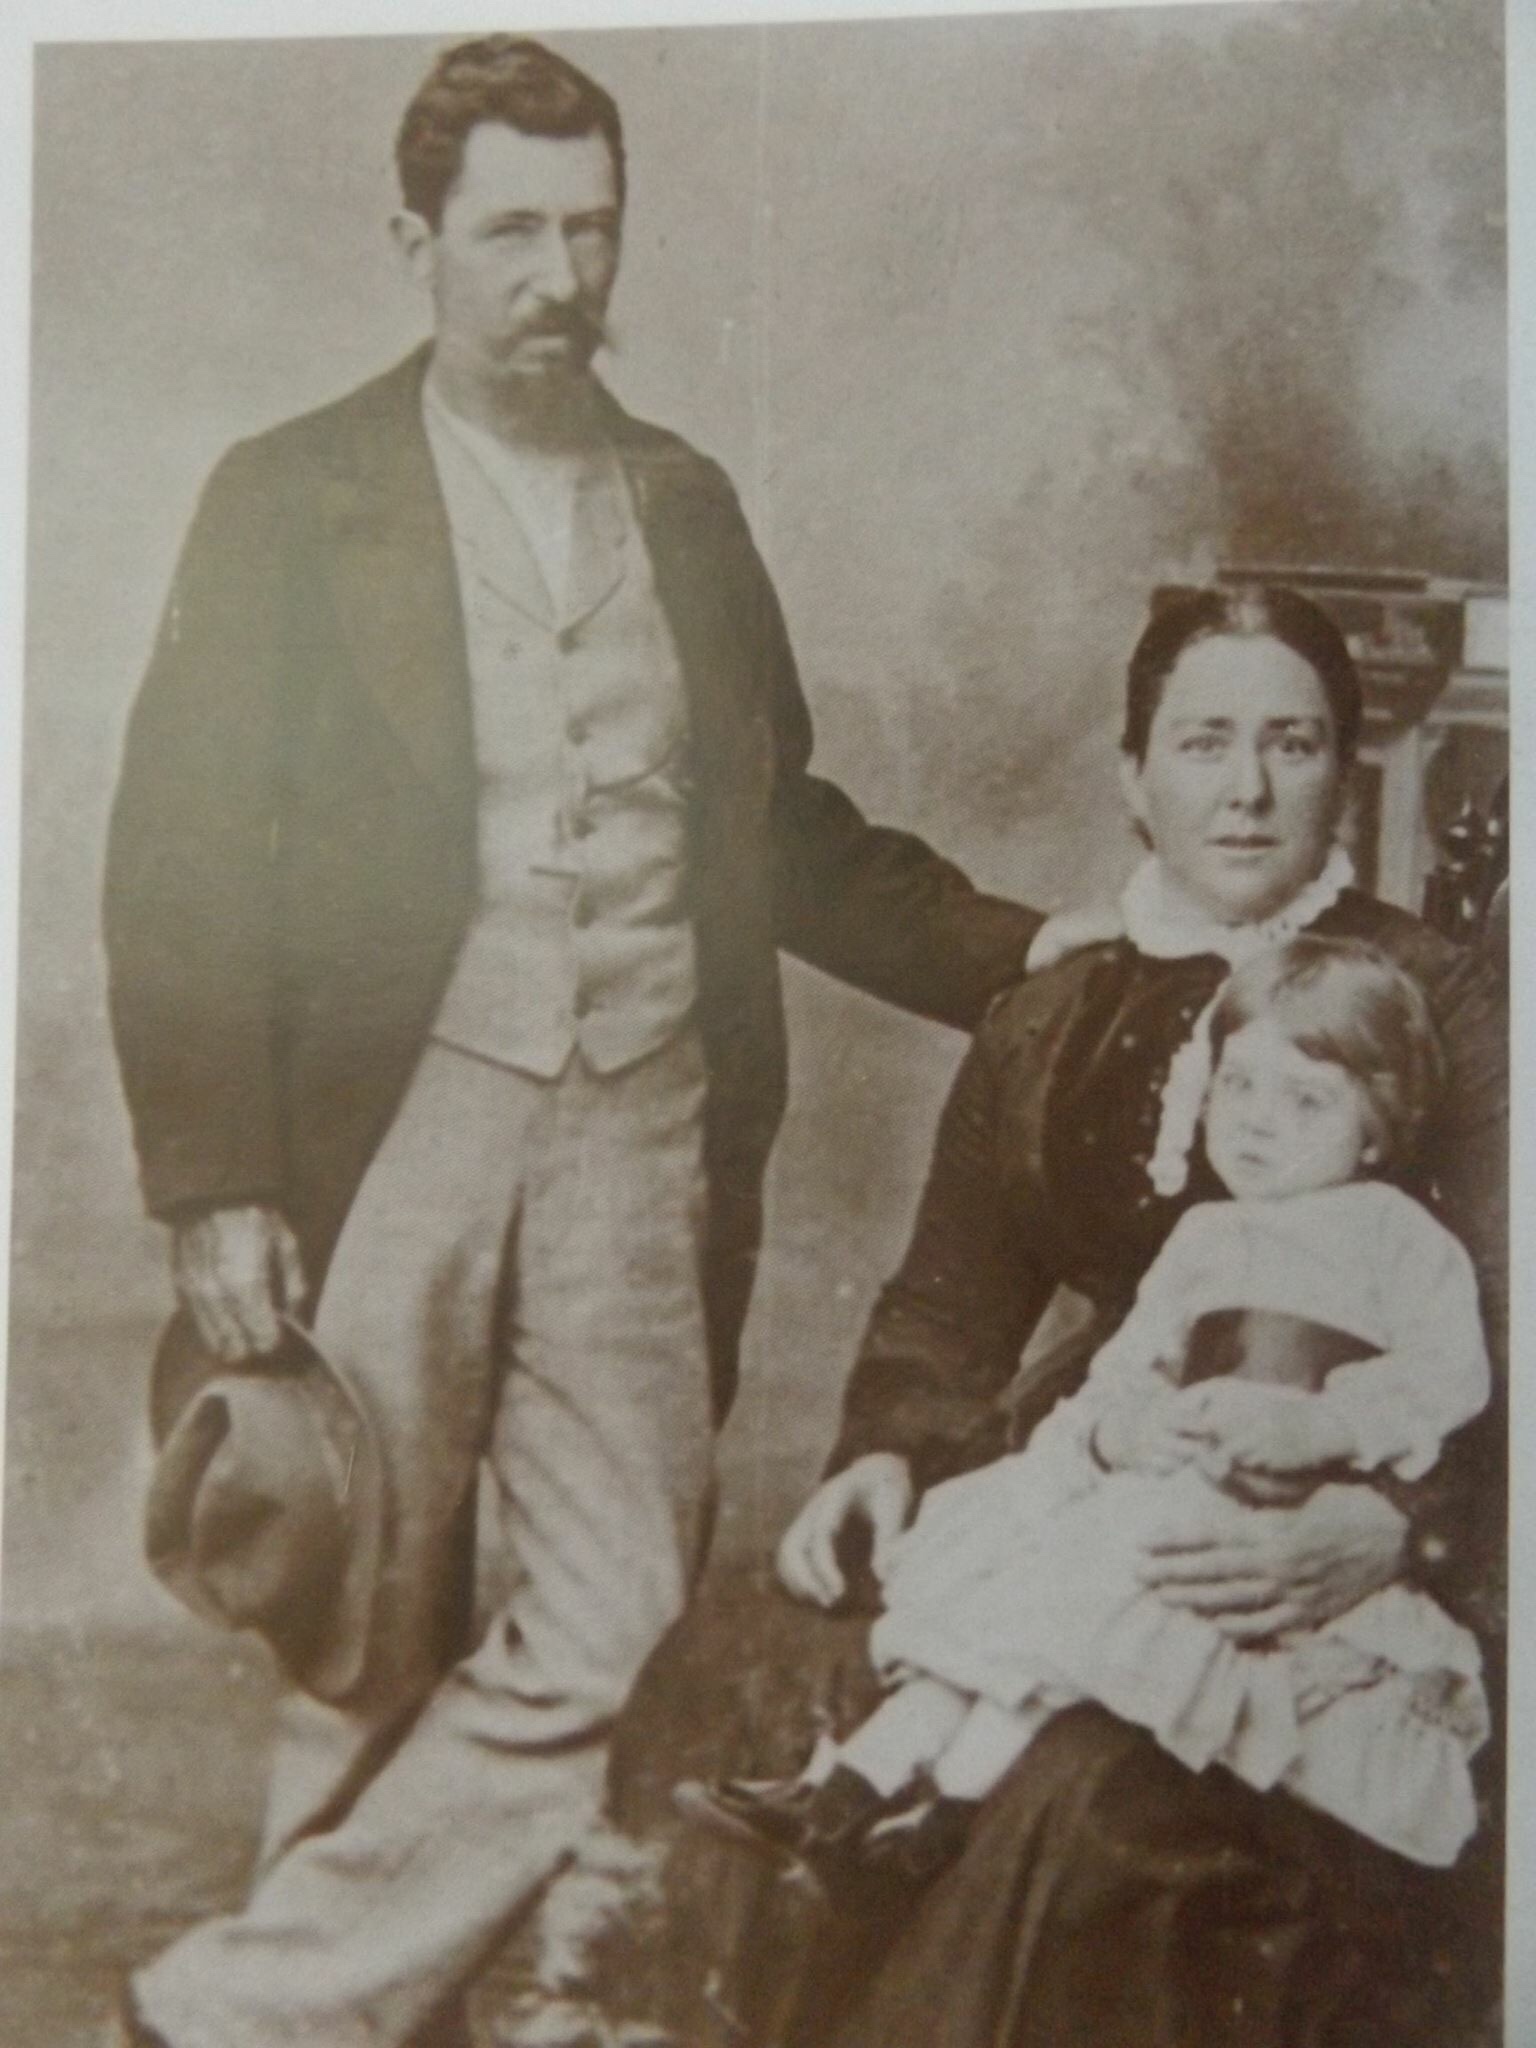 Photograph of Joseph and Mary Dolleur with one of their ten children. Source: Photograph uploaded to public family trees of Joseph Dolleur (Delore) on the Ancestry website.